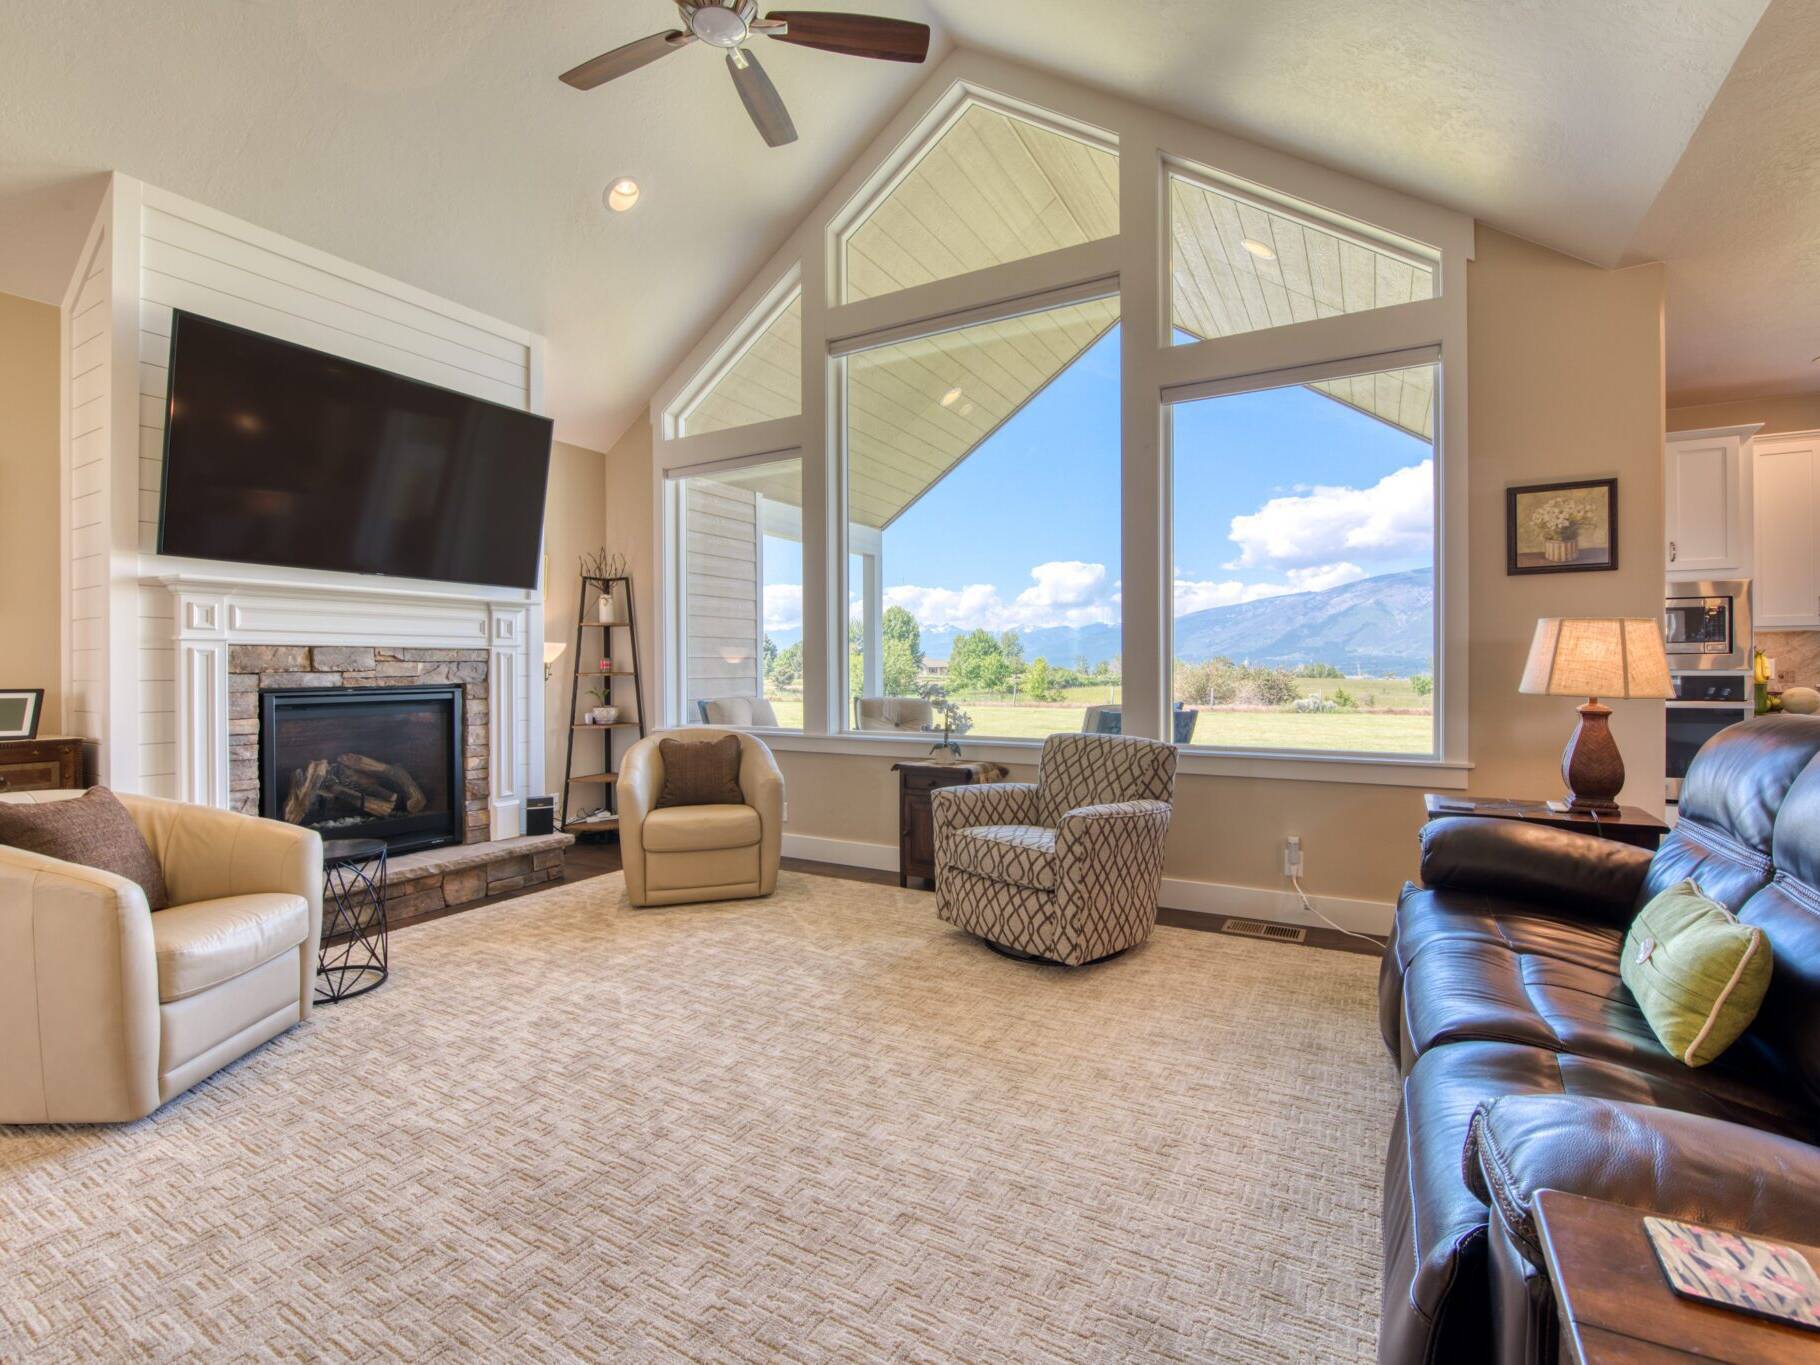 Living room with fireplace and large windows overlooking the Bitterroot valley, in a home built by Big Sky Builders in Hamilton, MT